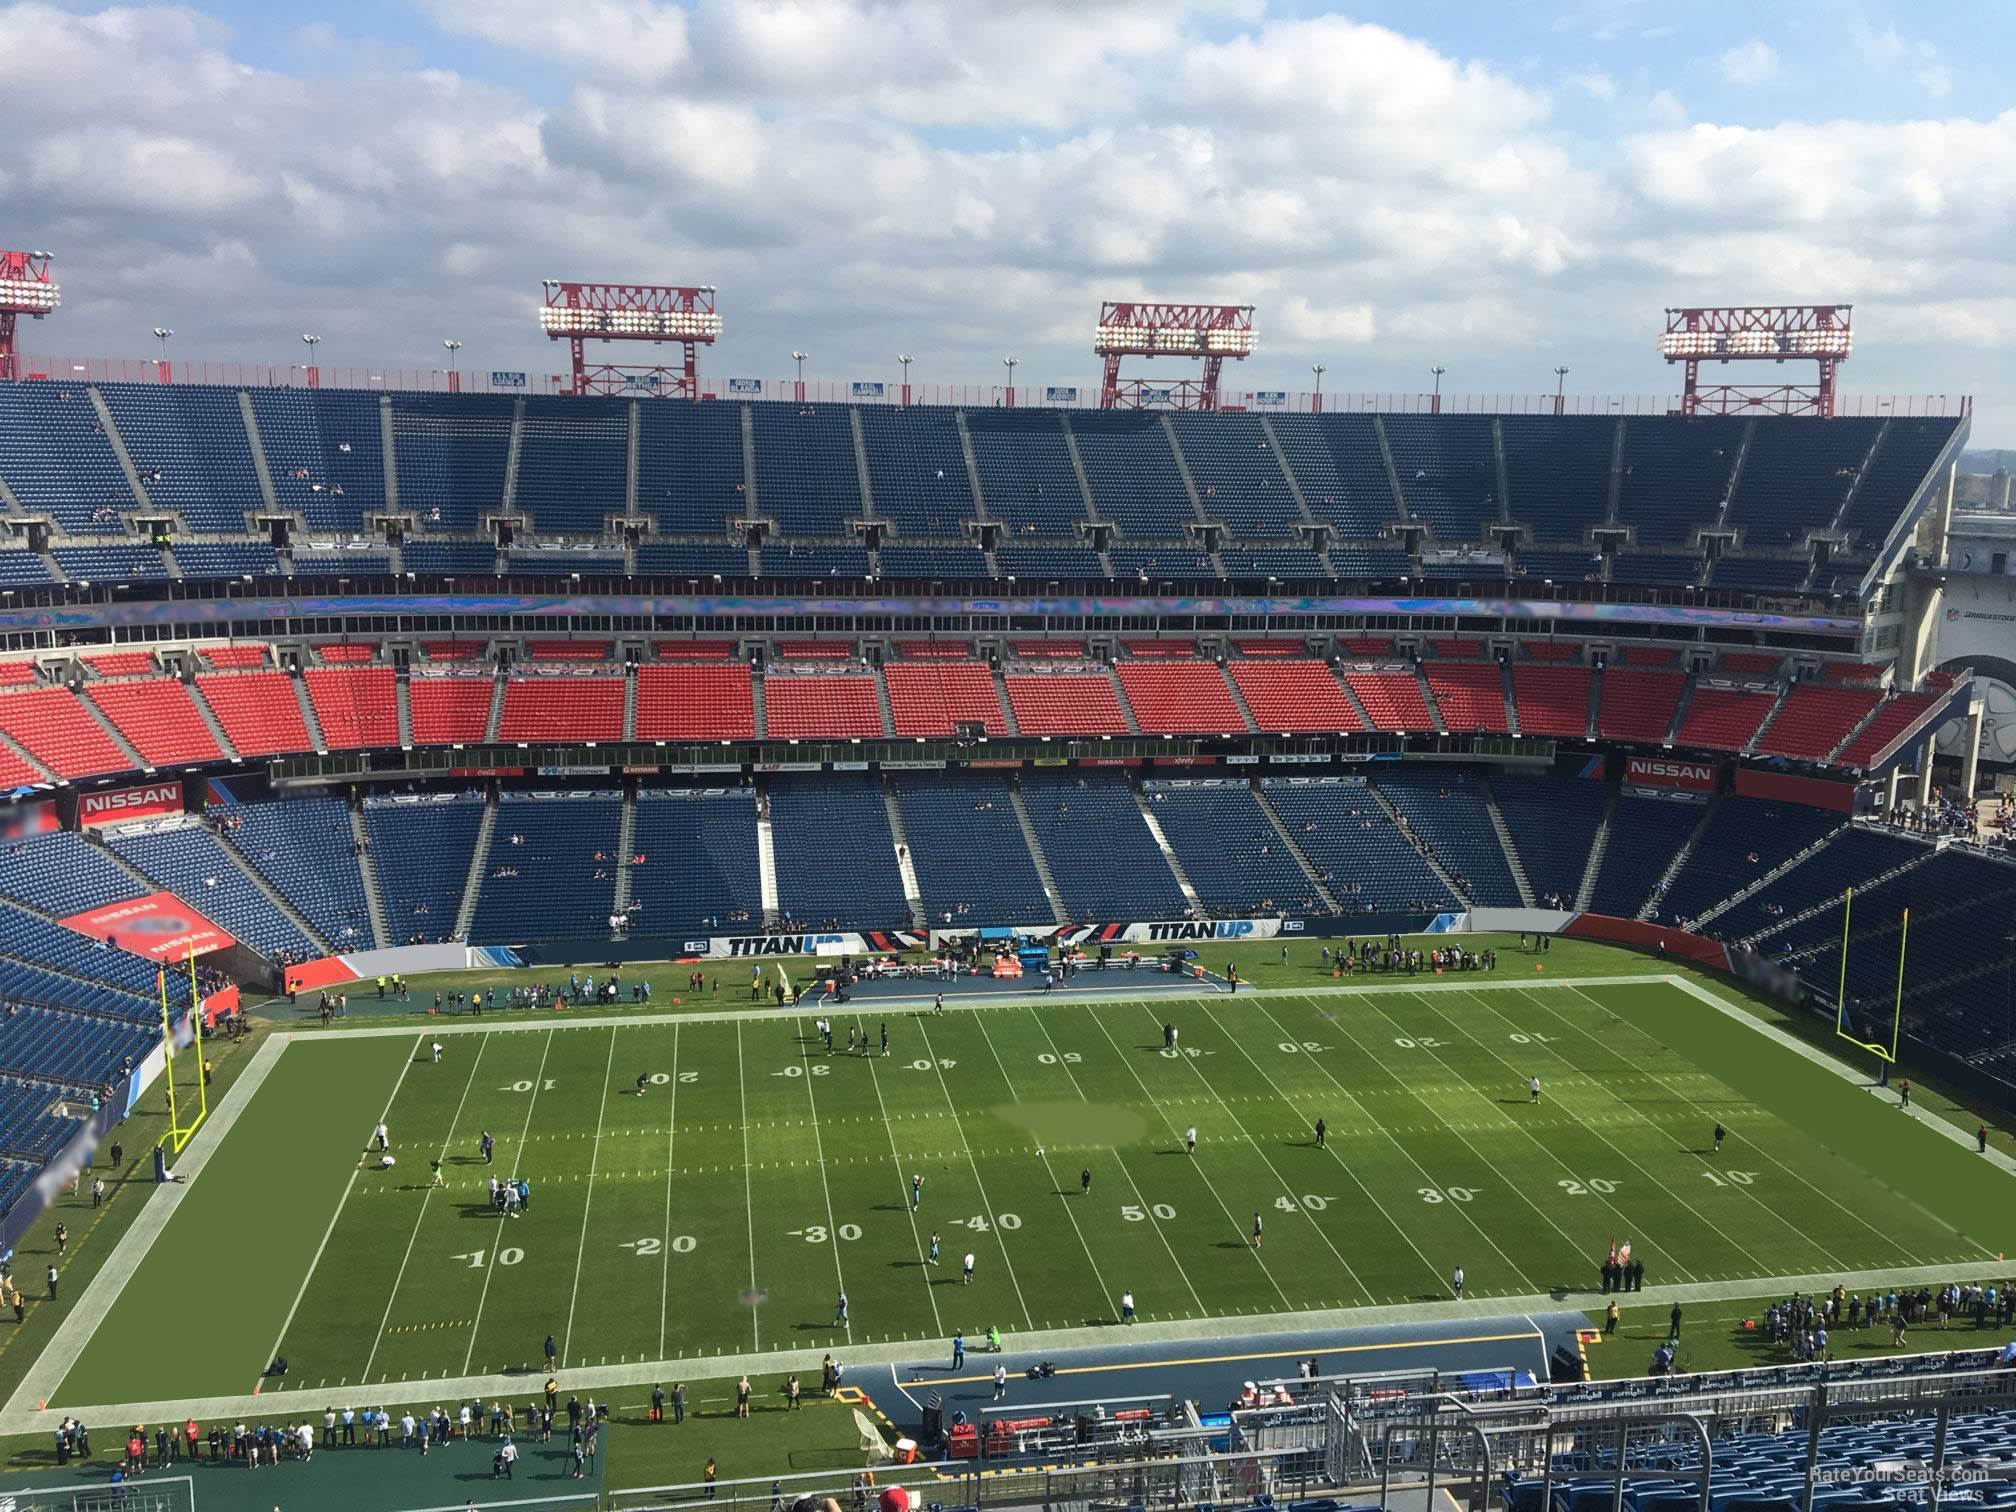 section 337, row aa seat view  for football - nissan stadium